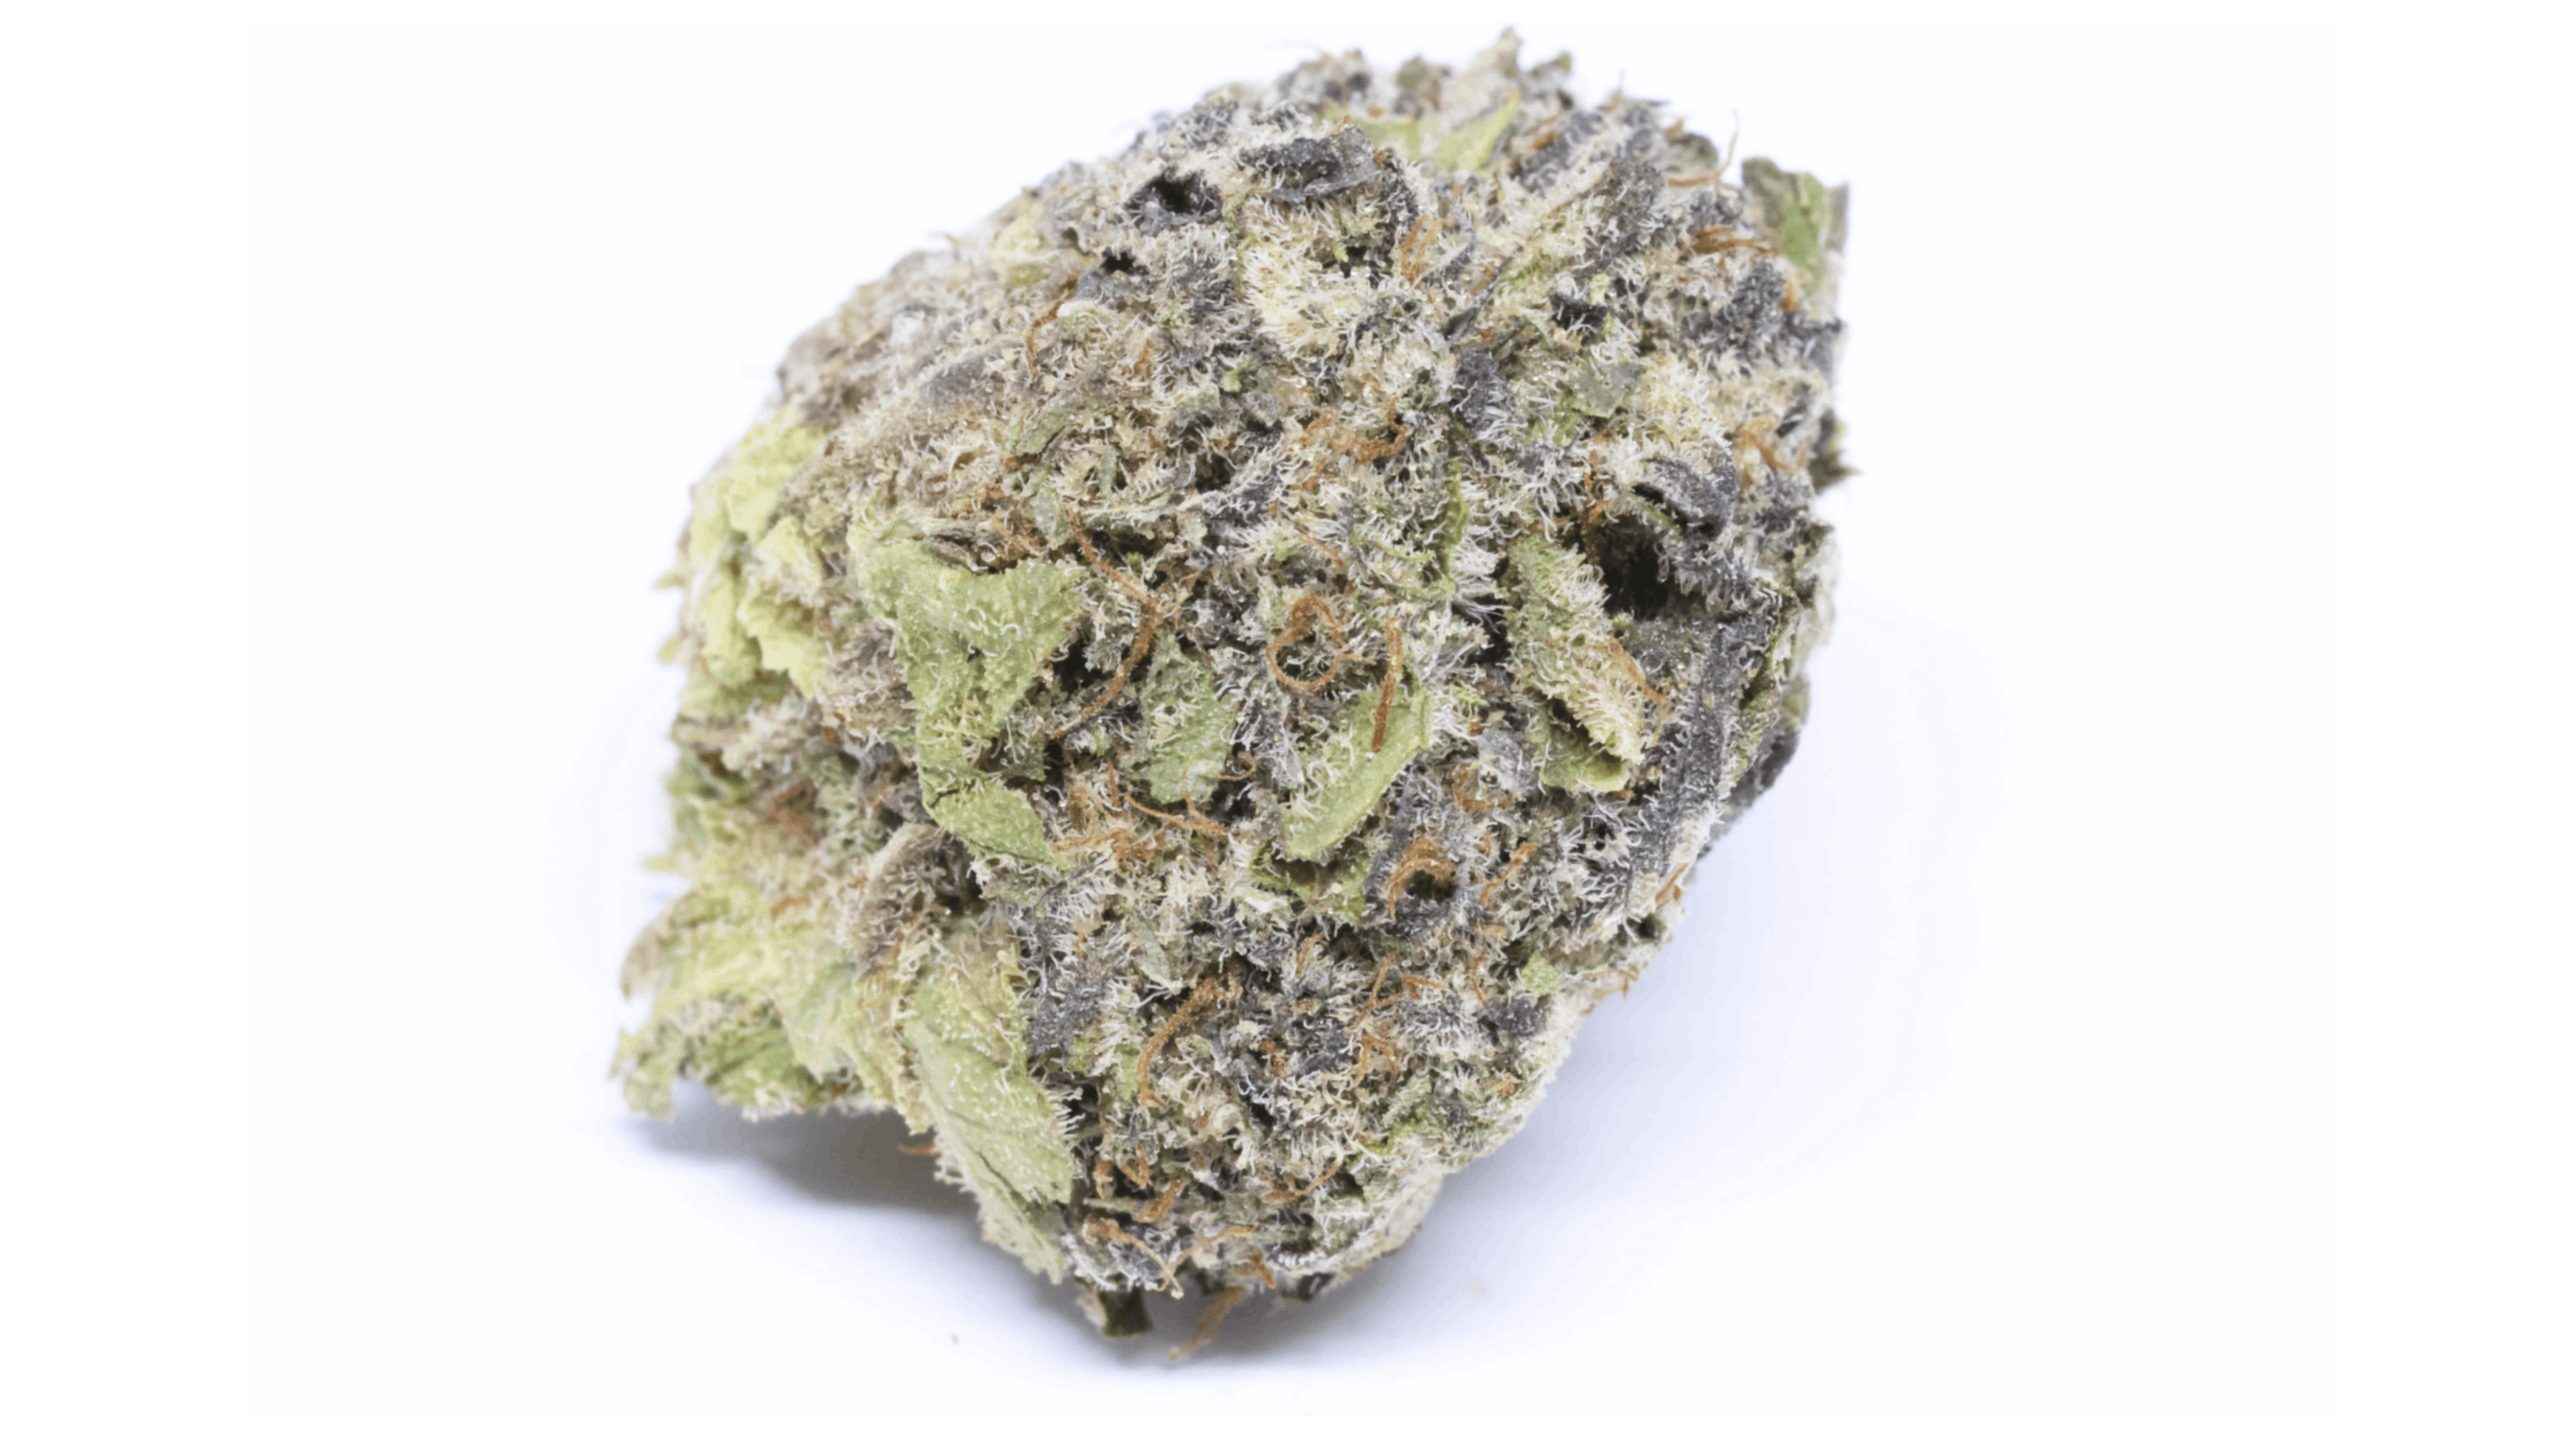 As mentioned earlier, Gods Green Crack is a high-THC strain, with an average THC content of 22 to 25 percent. 